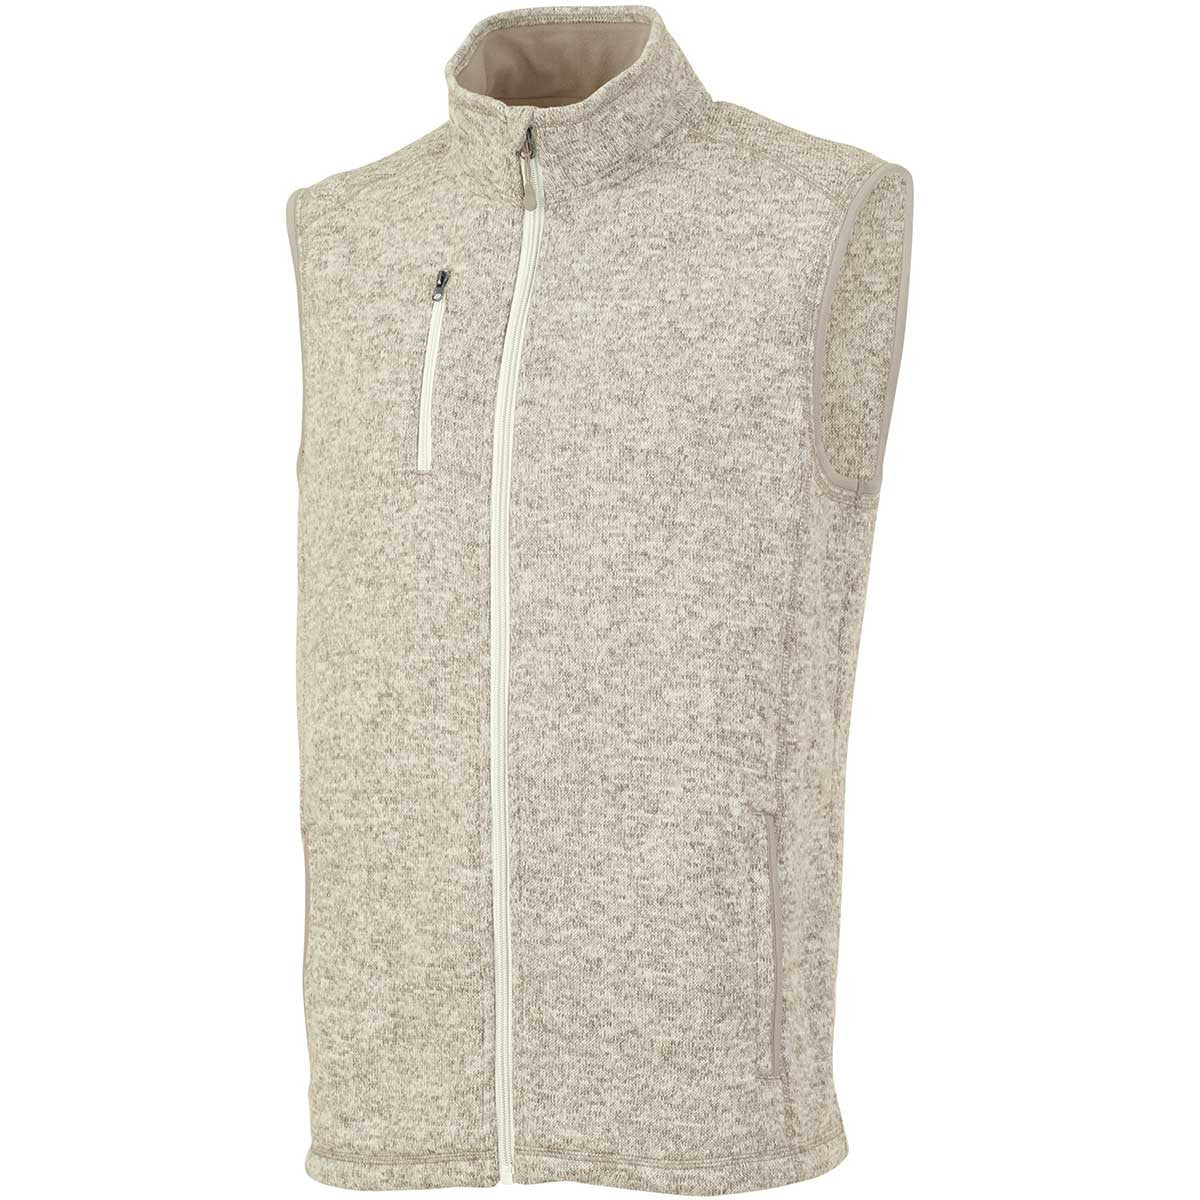 Charles River Women's Oatmeal Heather Pacific Heathered Fleece Vest